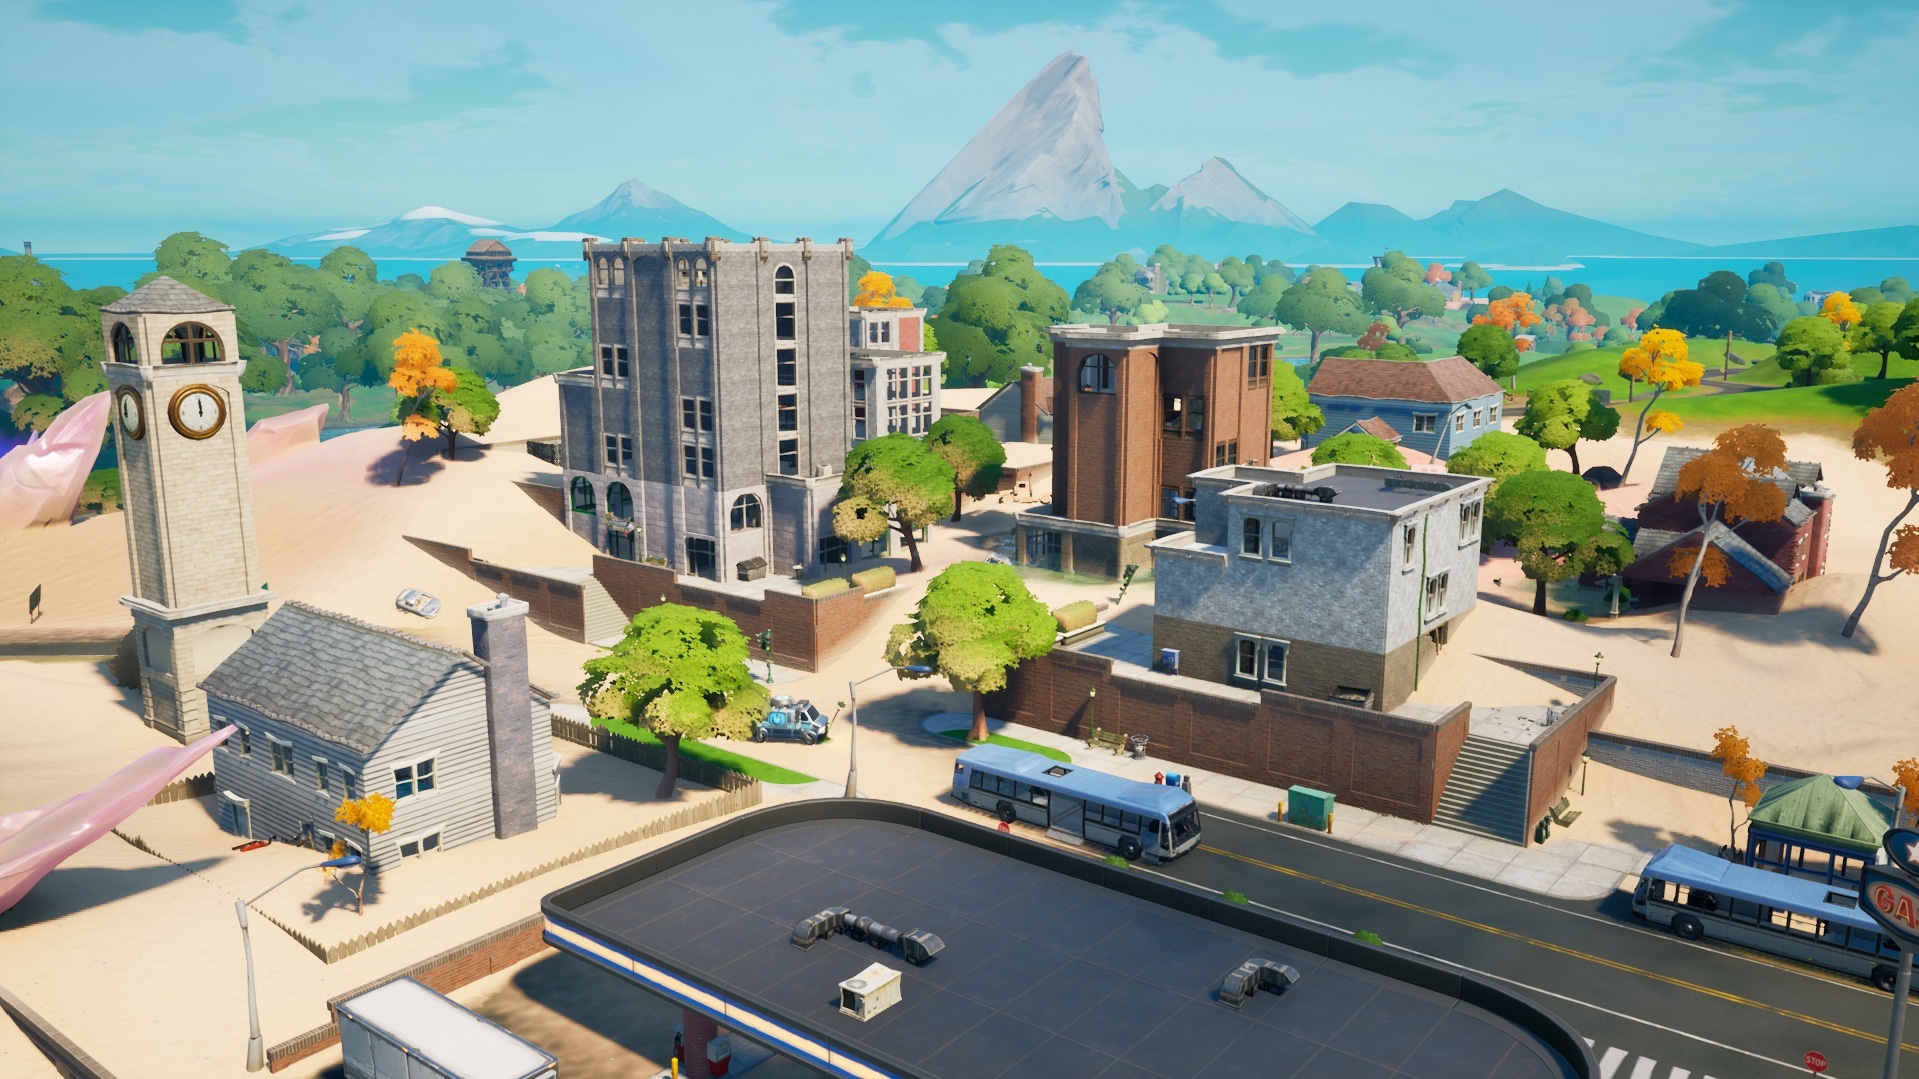 Tilted Towers will return to the Fortnite island in Chapter 3